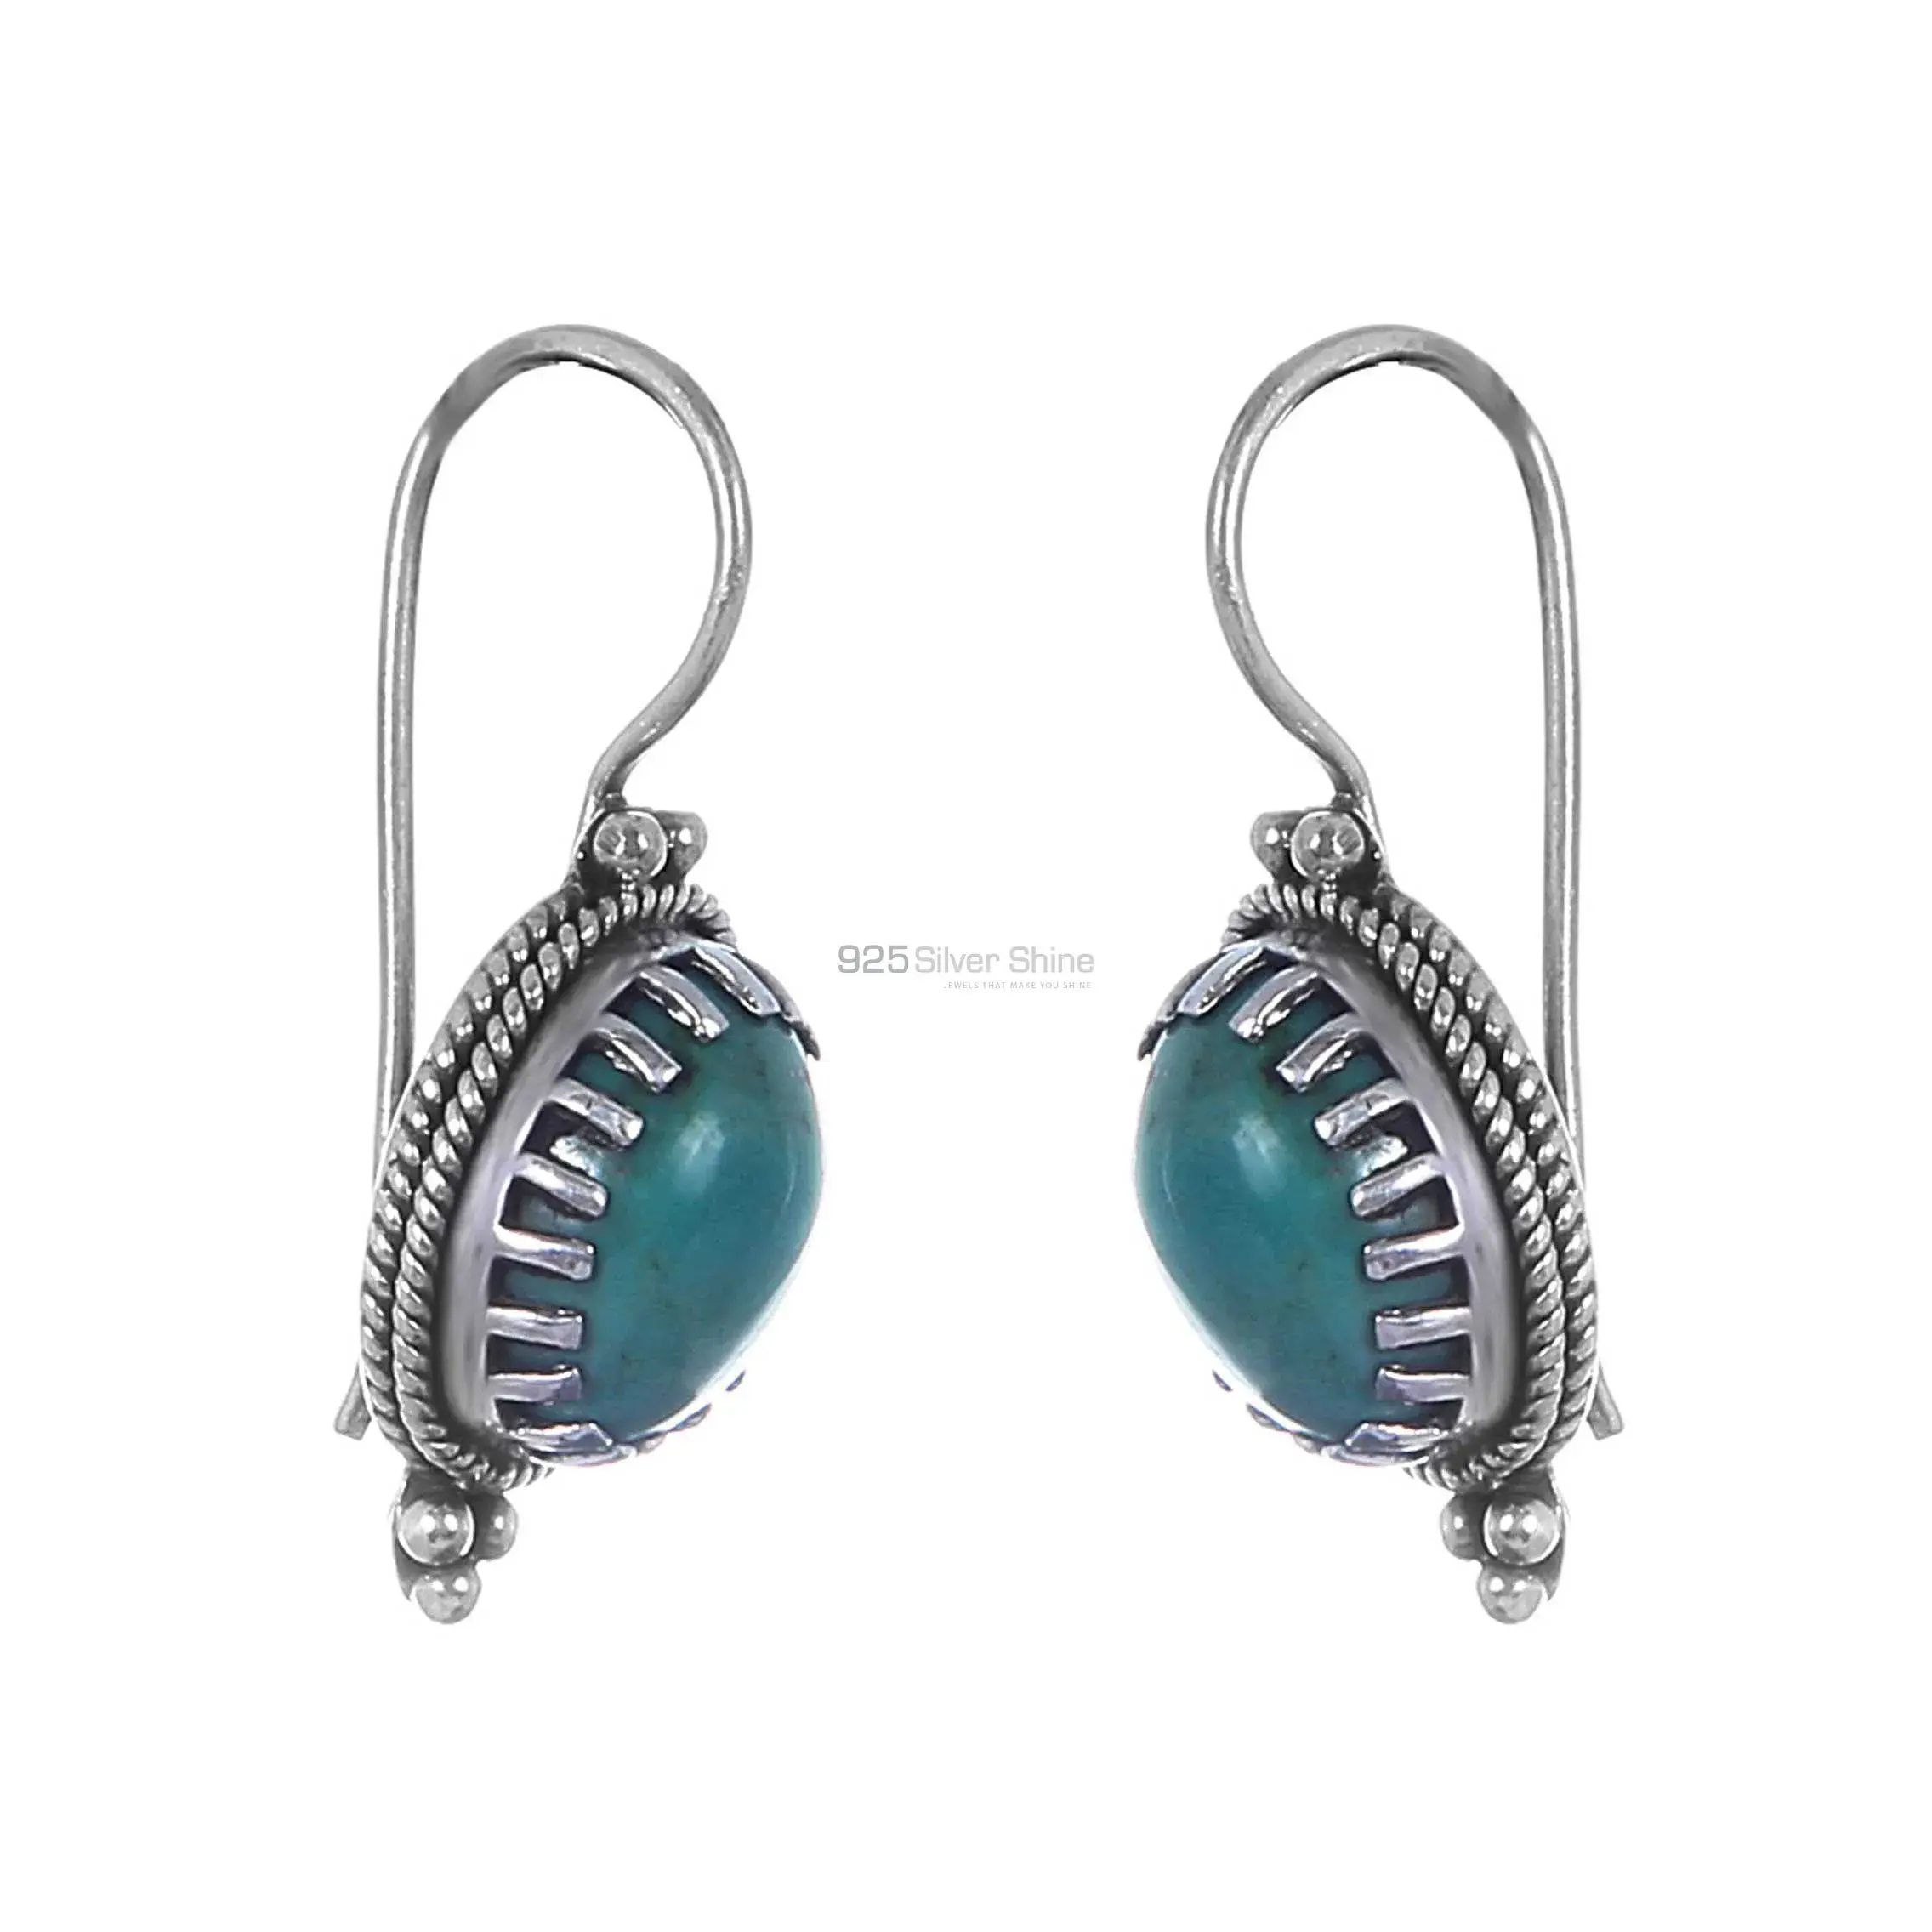 Cabochon Turquoise Gemstone Earring In Sterling Silver Jewelry 925SE193_0